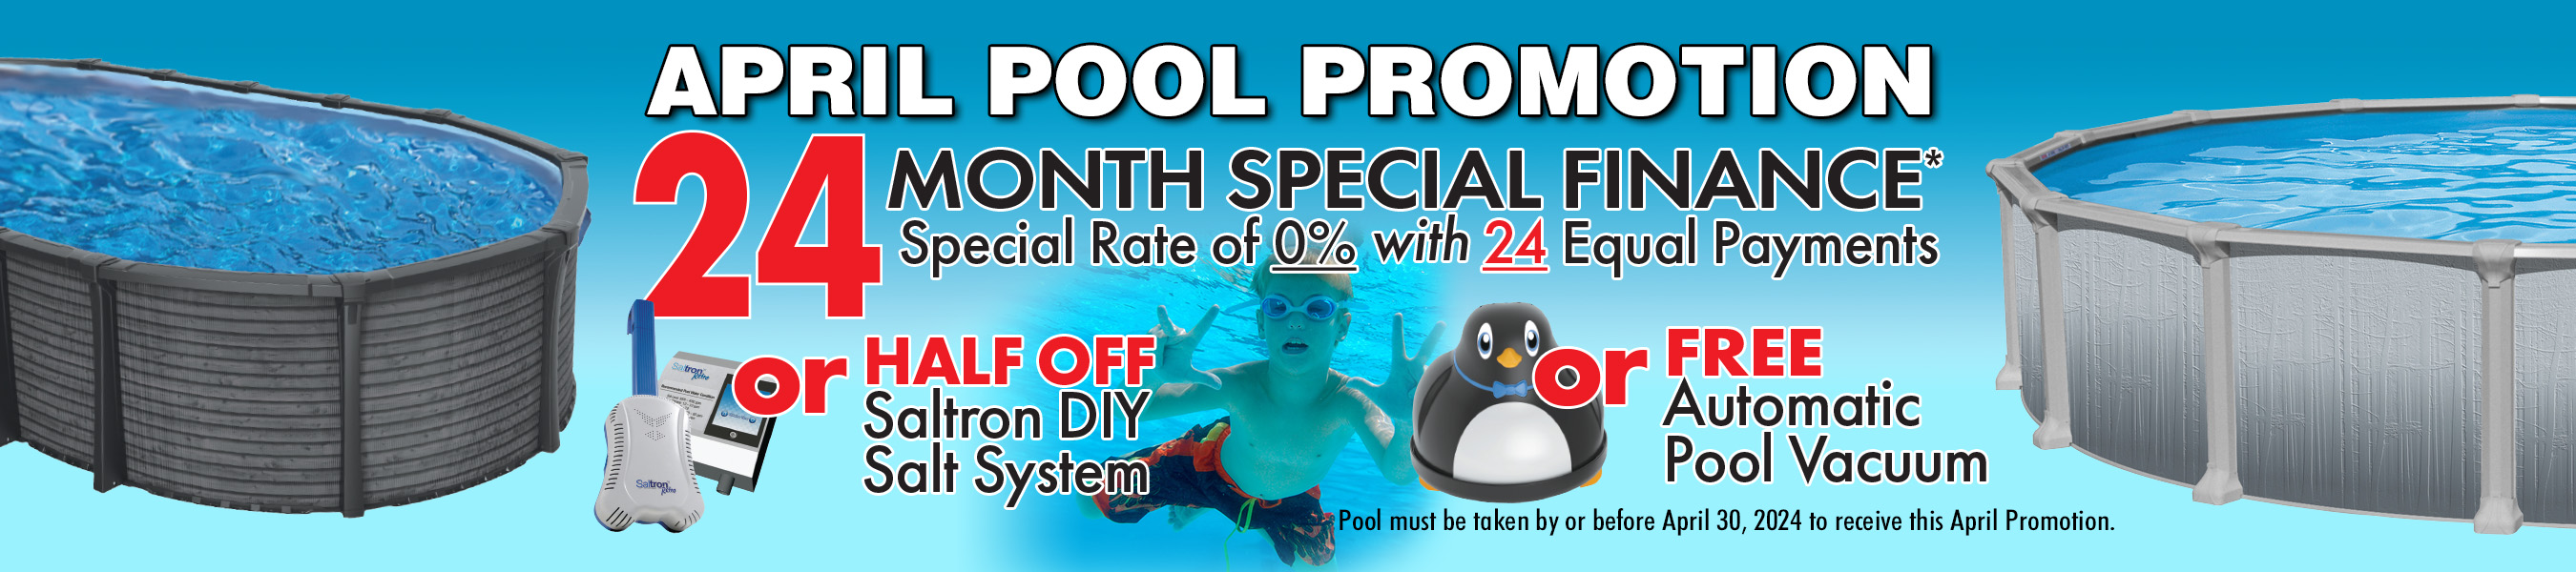 April Pool Promotion. 24 Month Special Finance with Special Rate of 0% with 24 Equal Payments, or Free Automatic Pool Vacuum, or Half Off Saltron DIY Salt System. Pool must be taken by or before April 30, 2024, to receive this April Promotion.